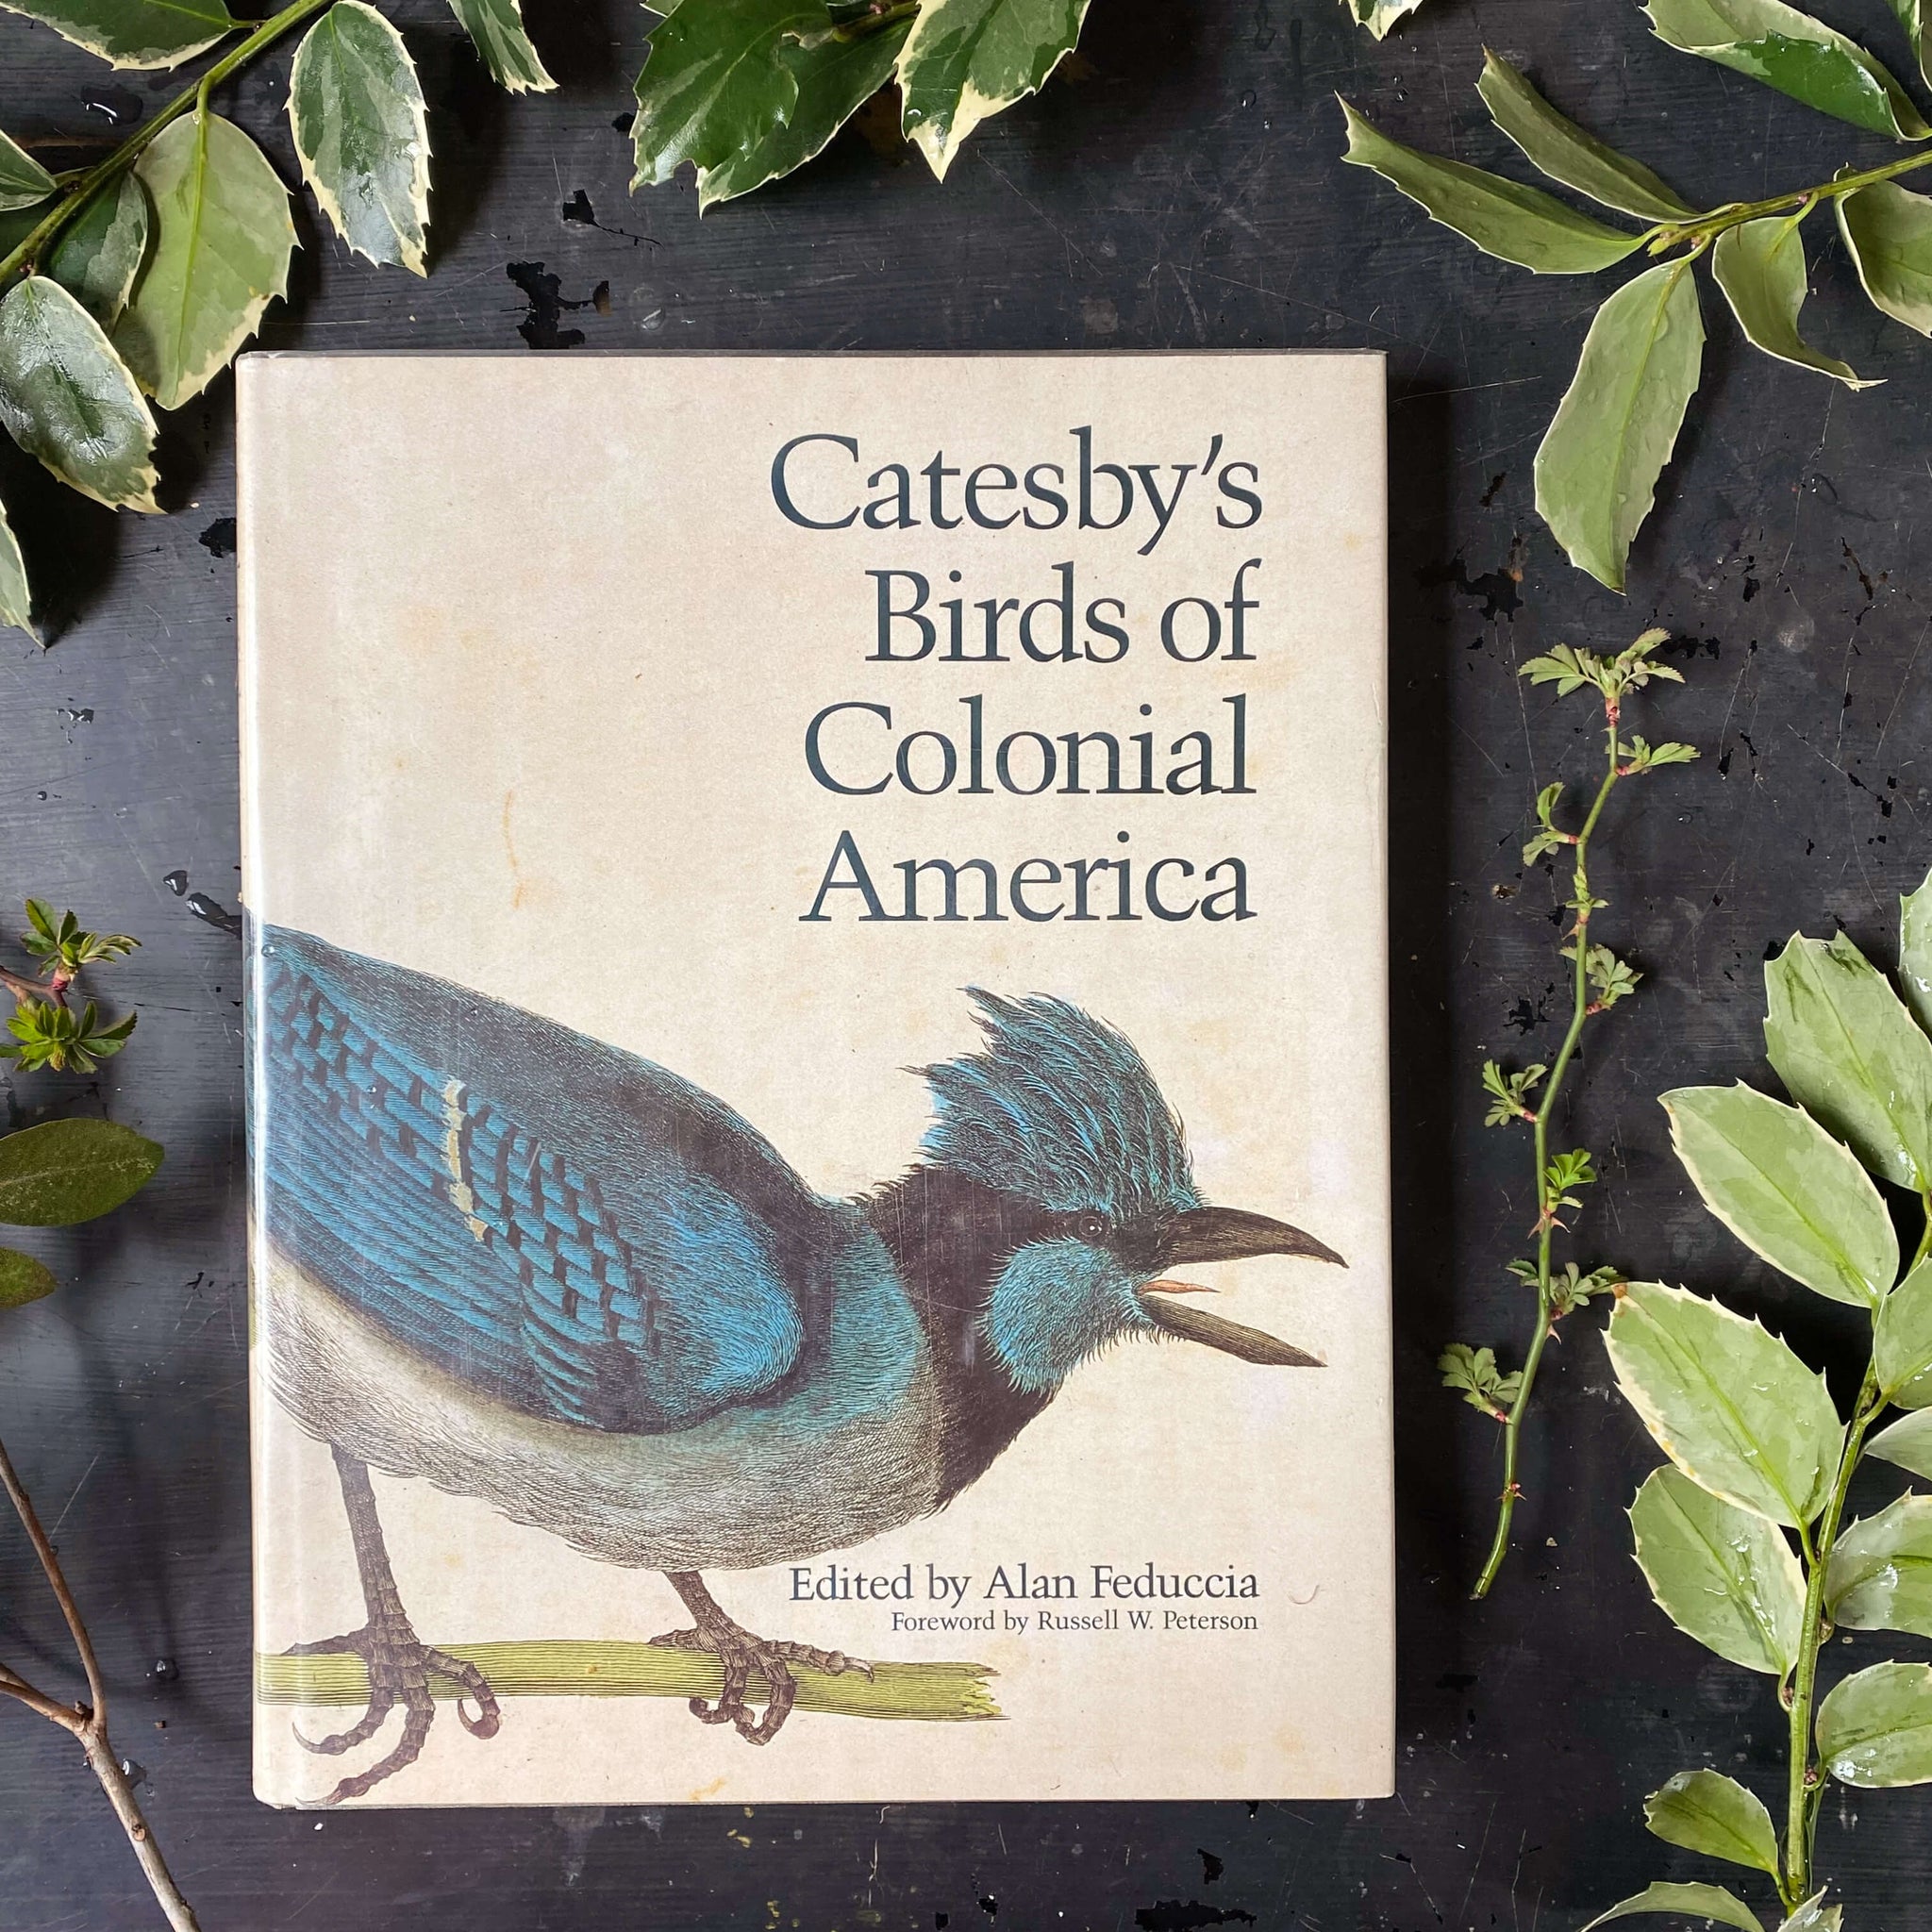 Catesby's Birds of Colonial America Edited by Alan Feduccia - 1985 Edition